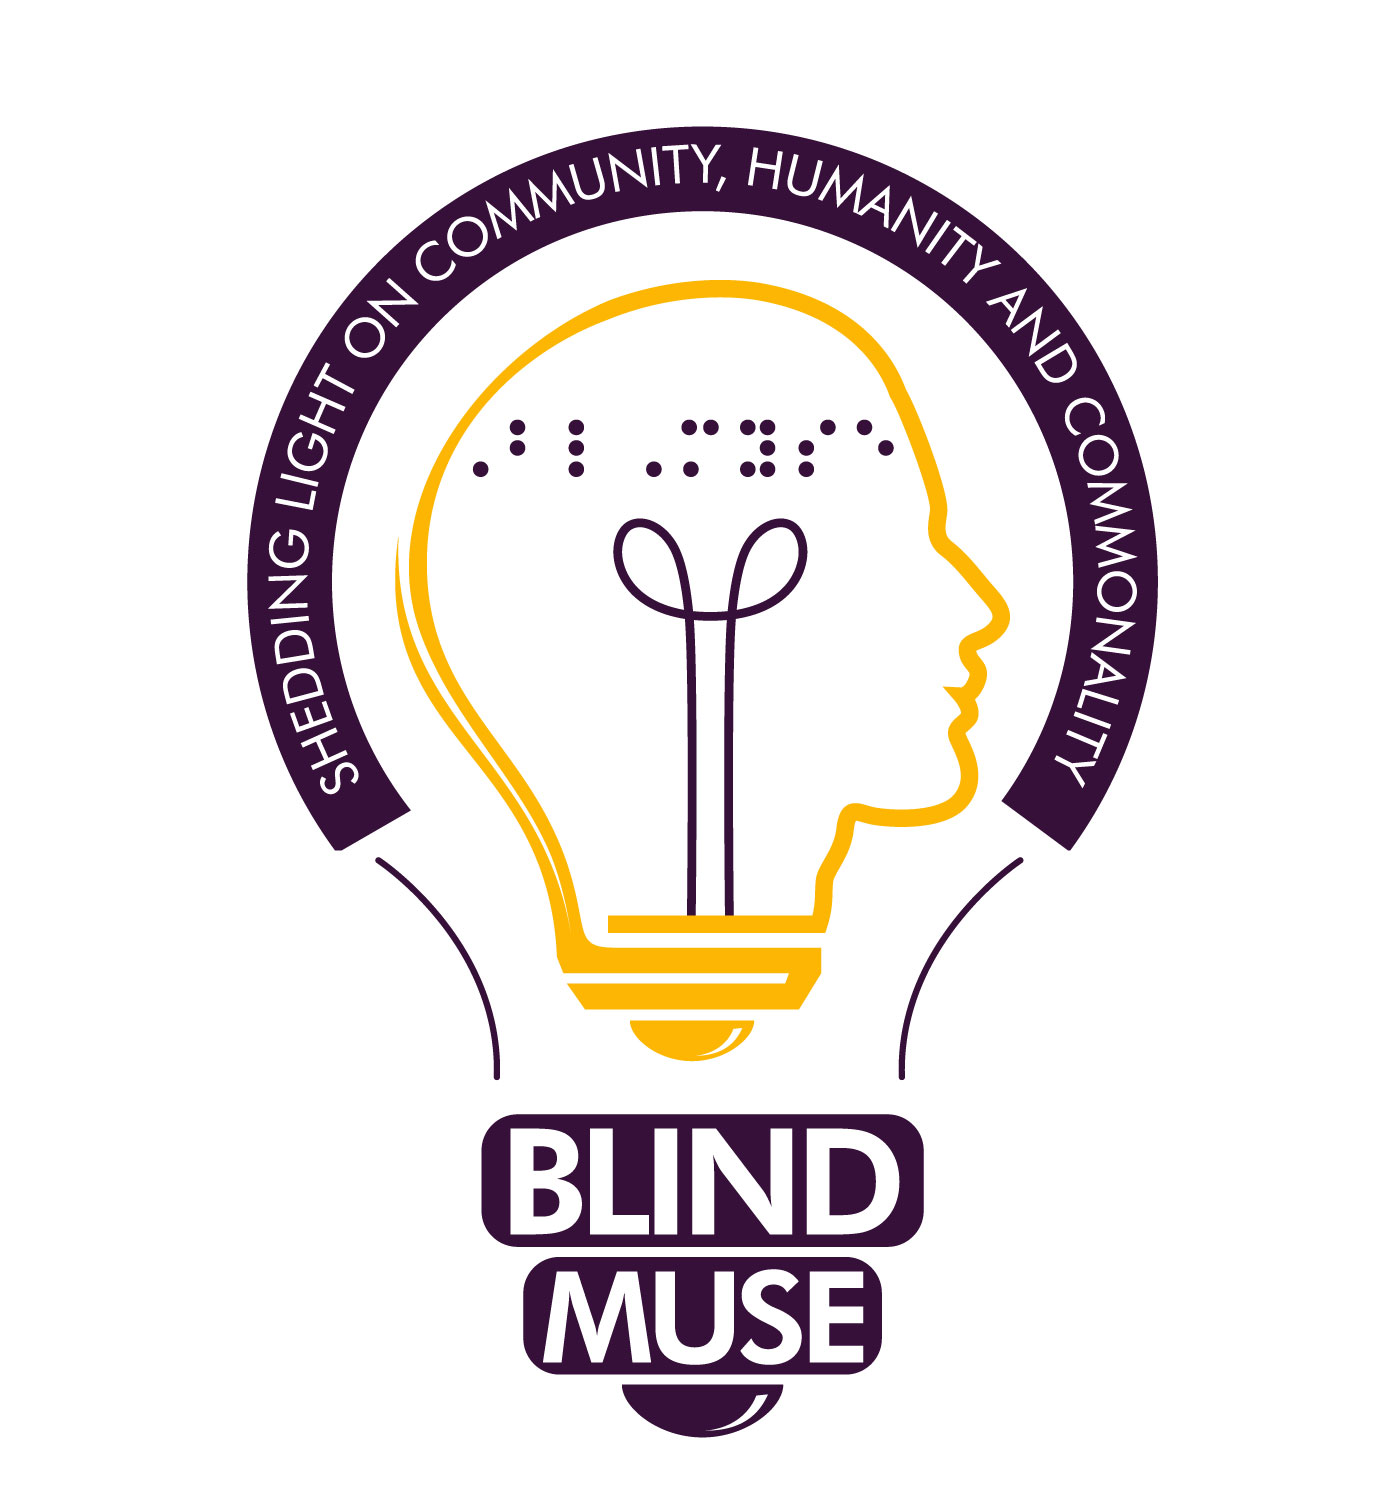 Blind Muse Foundation